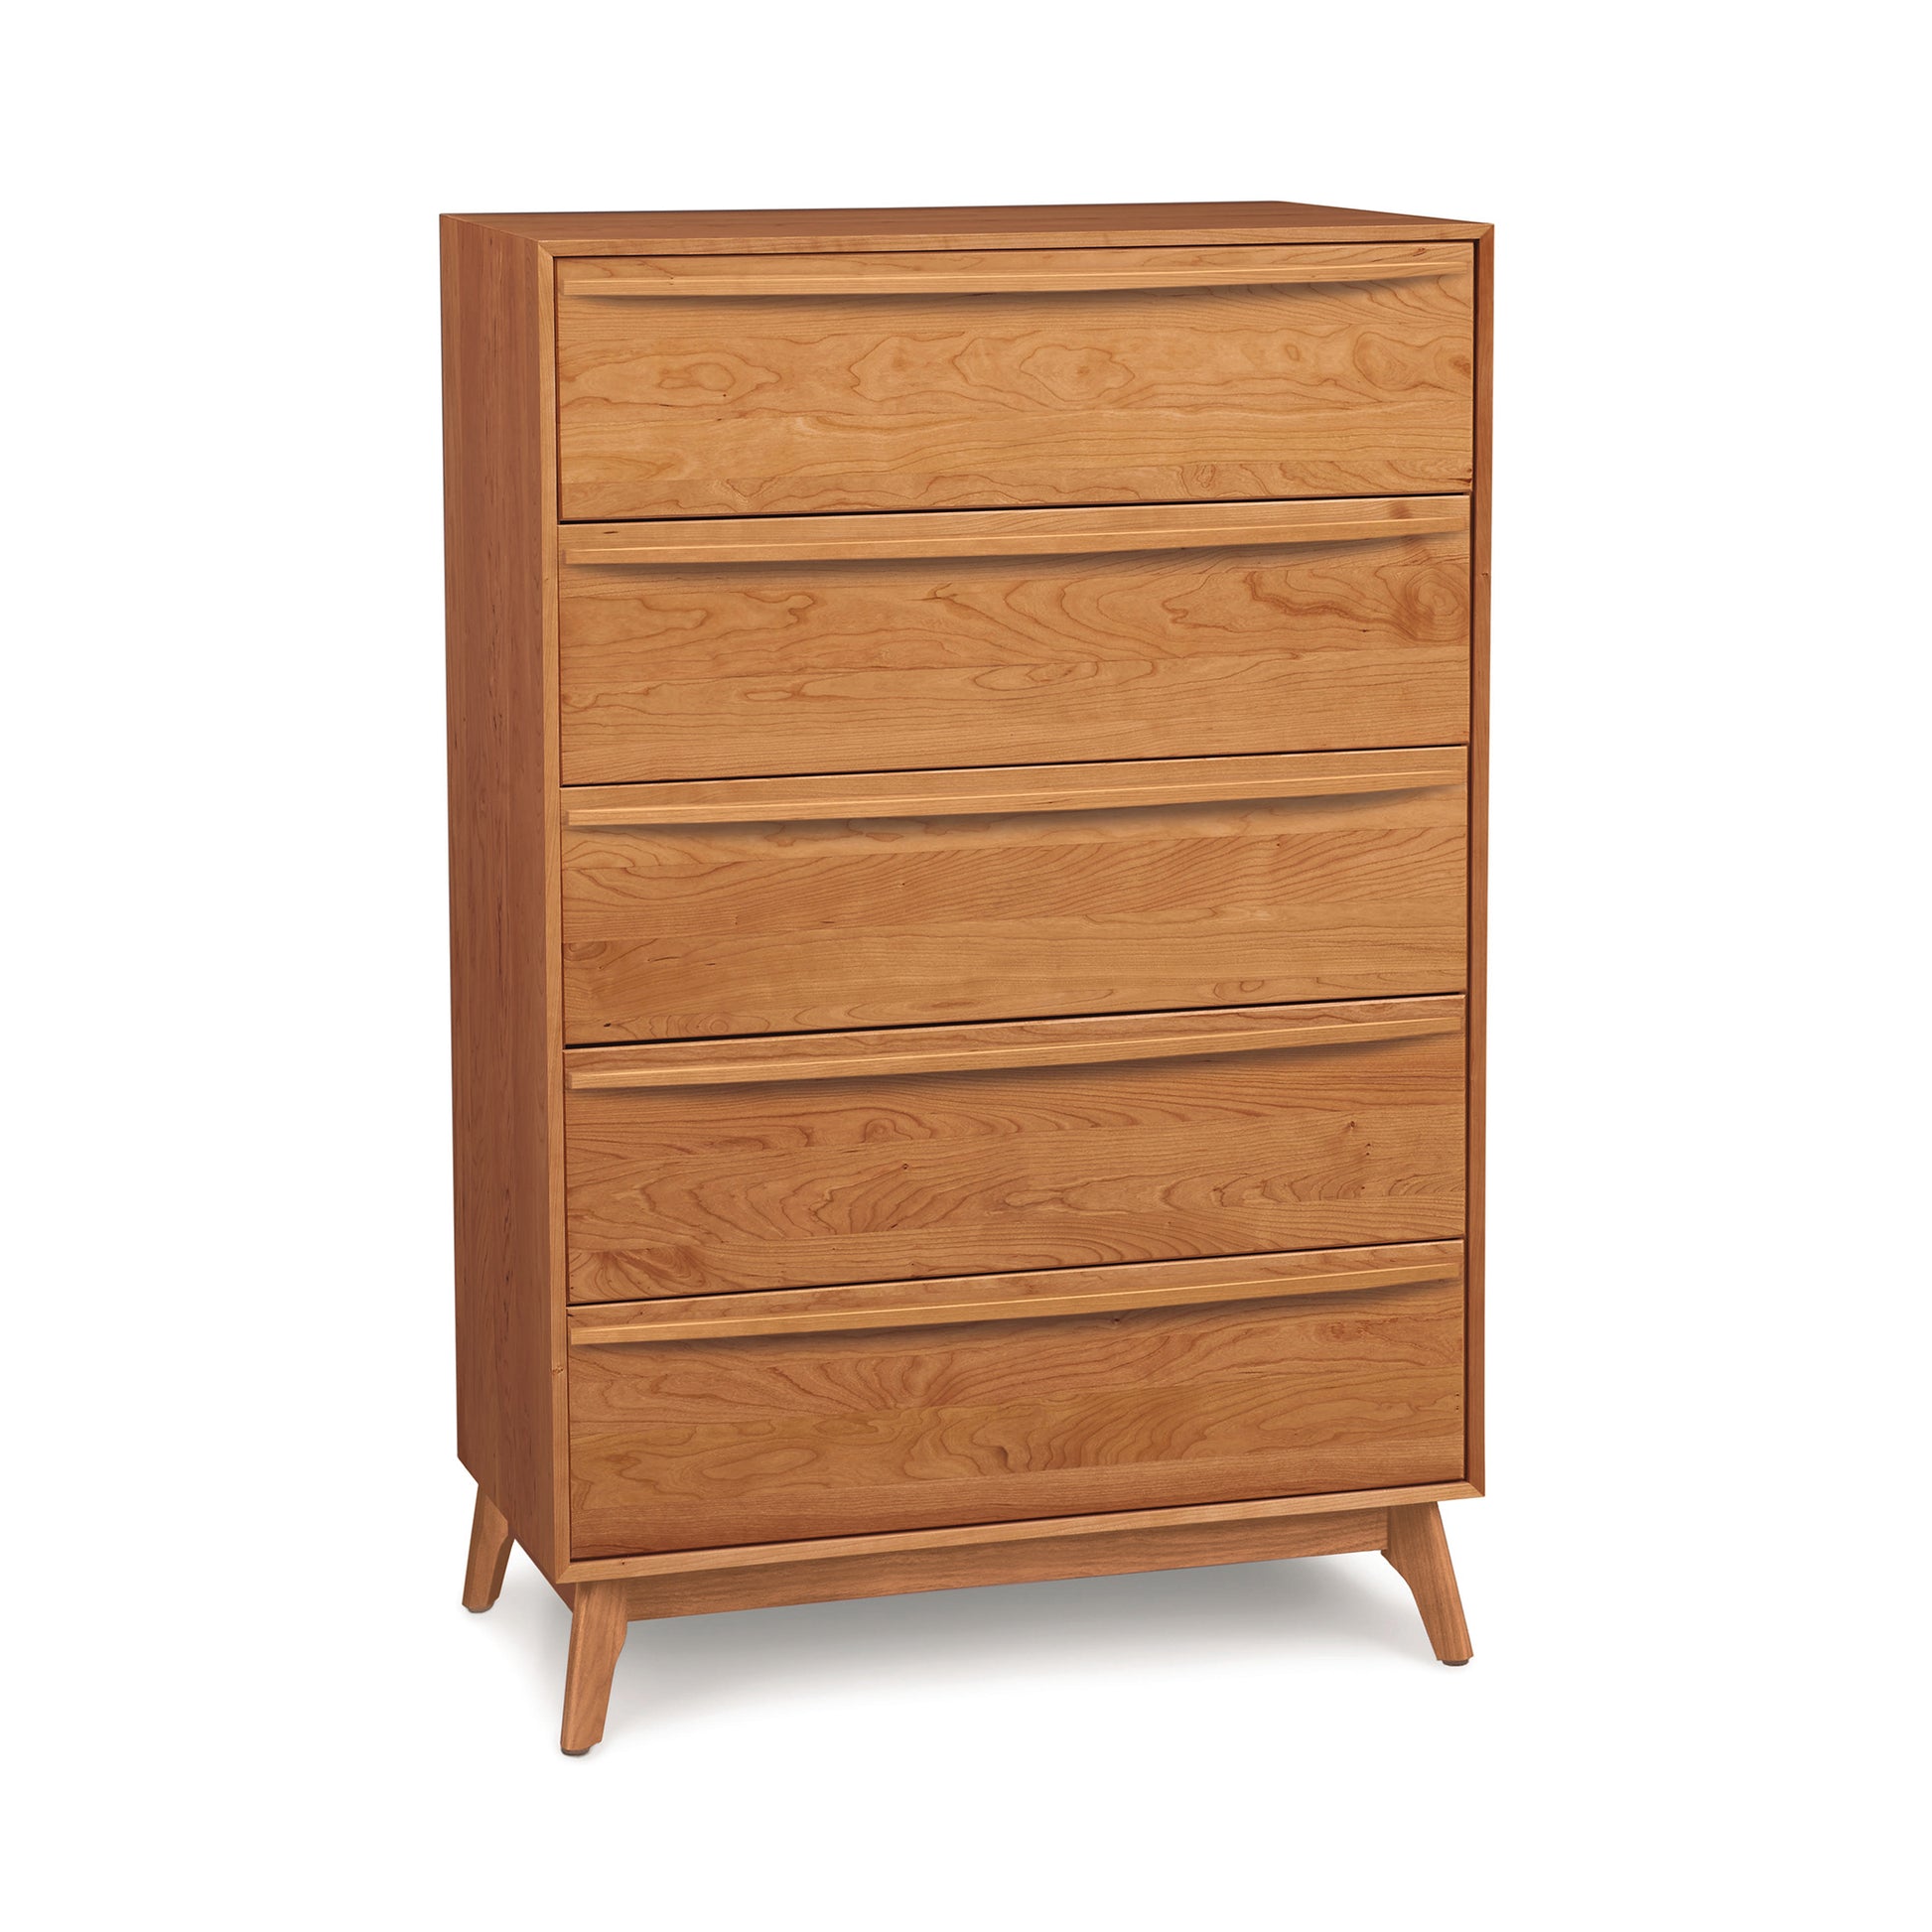 A Catalina 5-Drawer Wide Chest from Copeland Furniture on a white background.